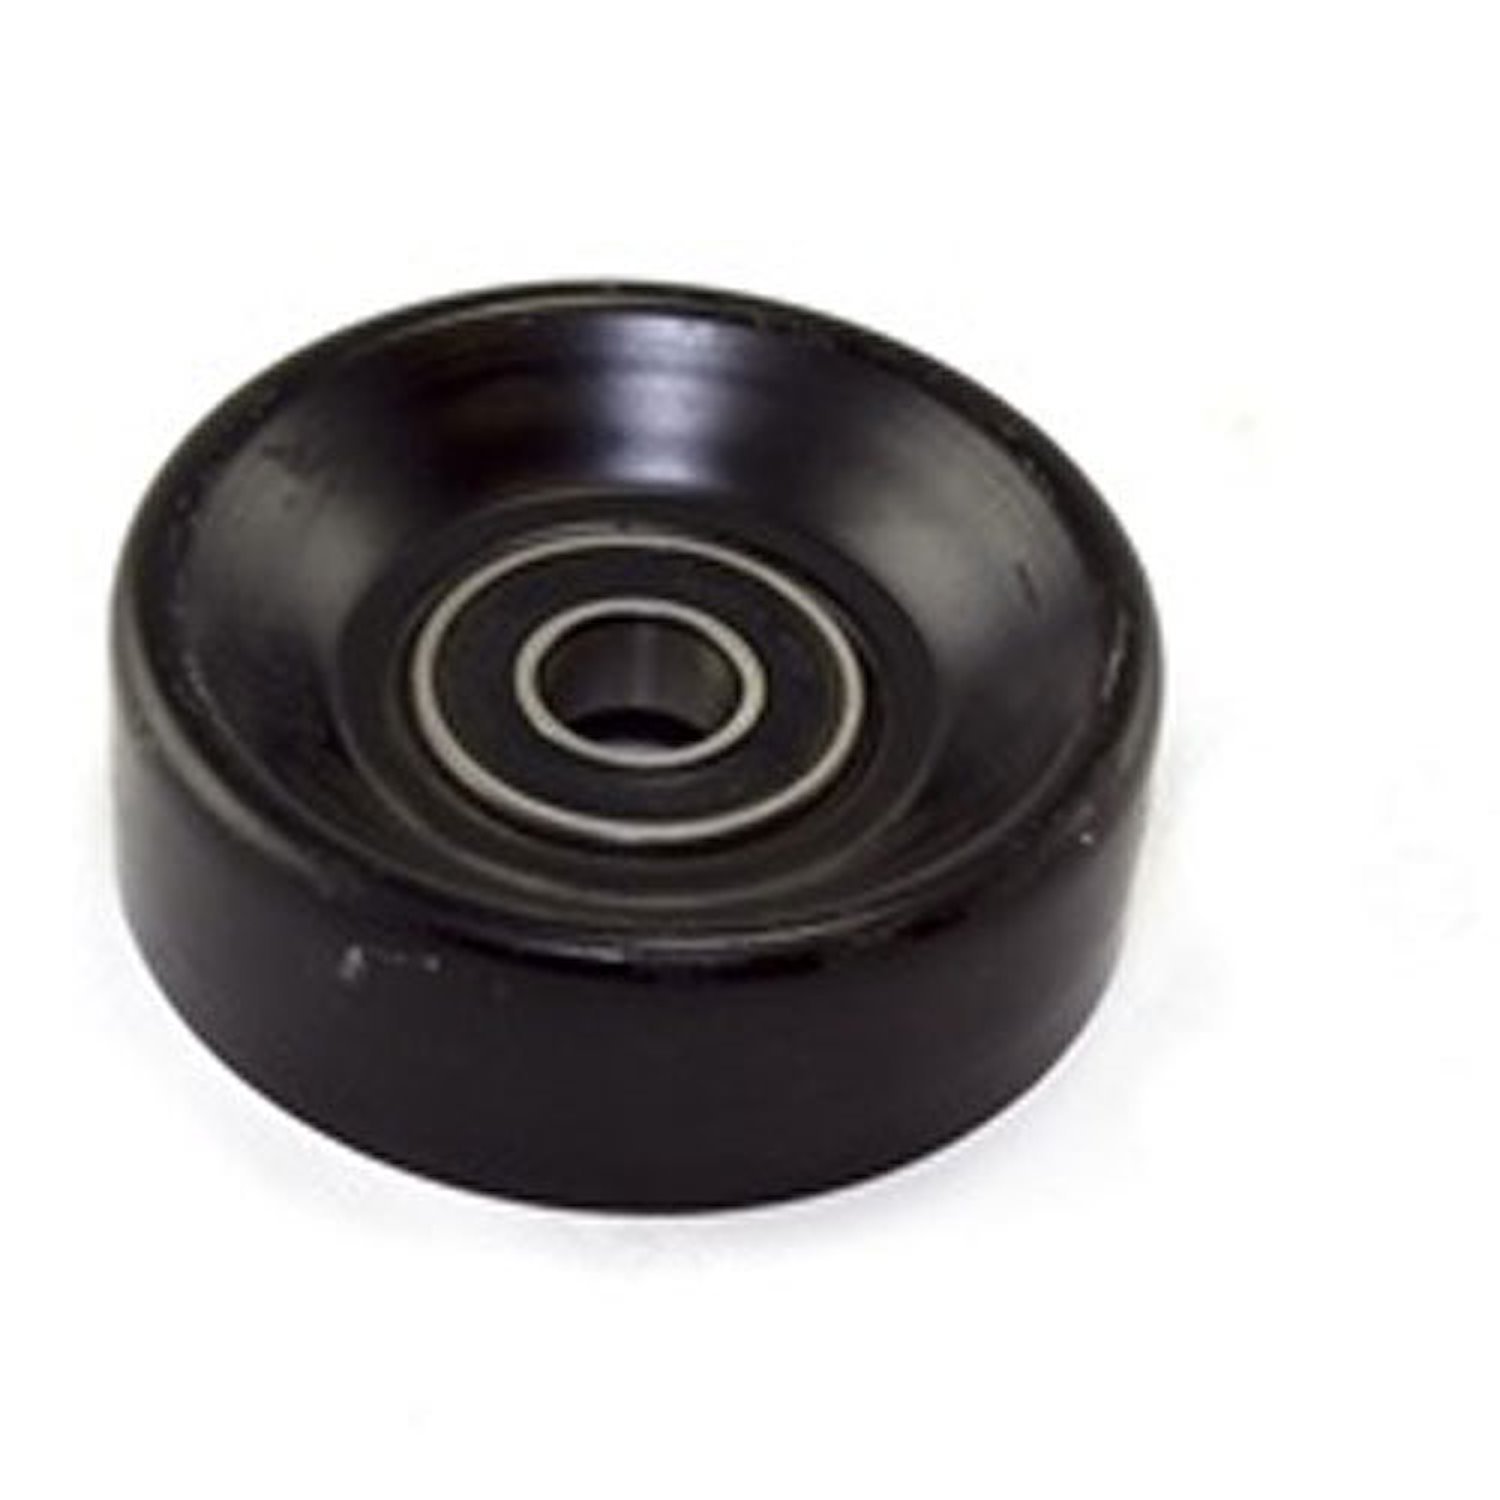 Replacement idler pulley from Omix-ADA11-12 Jeep Grand Cherokee WK2 s with a 5.7 liter engine.